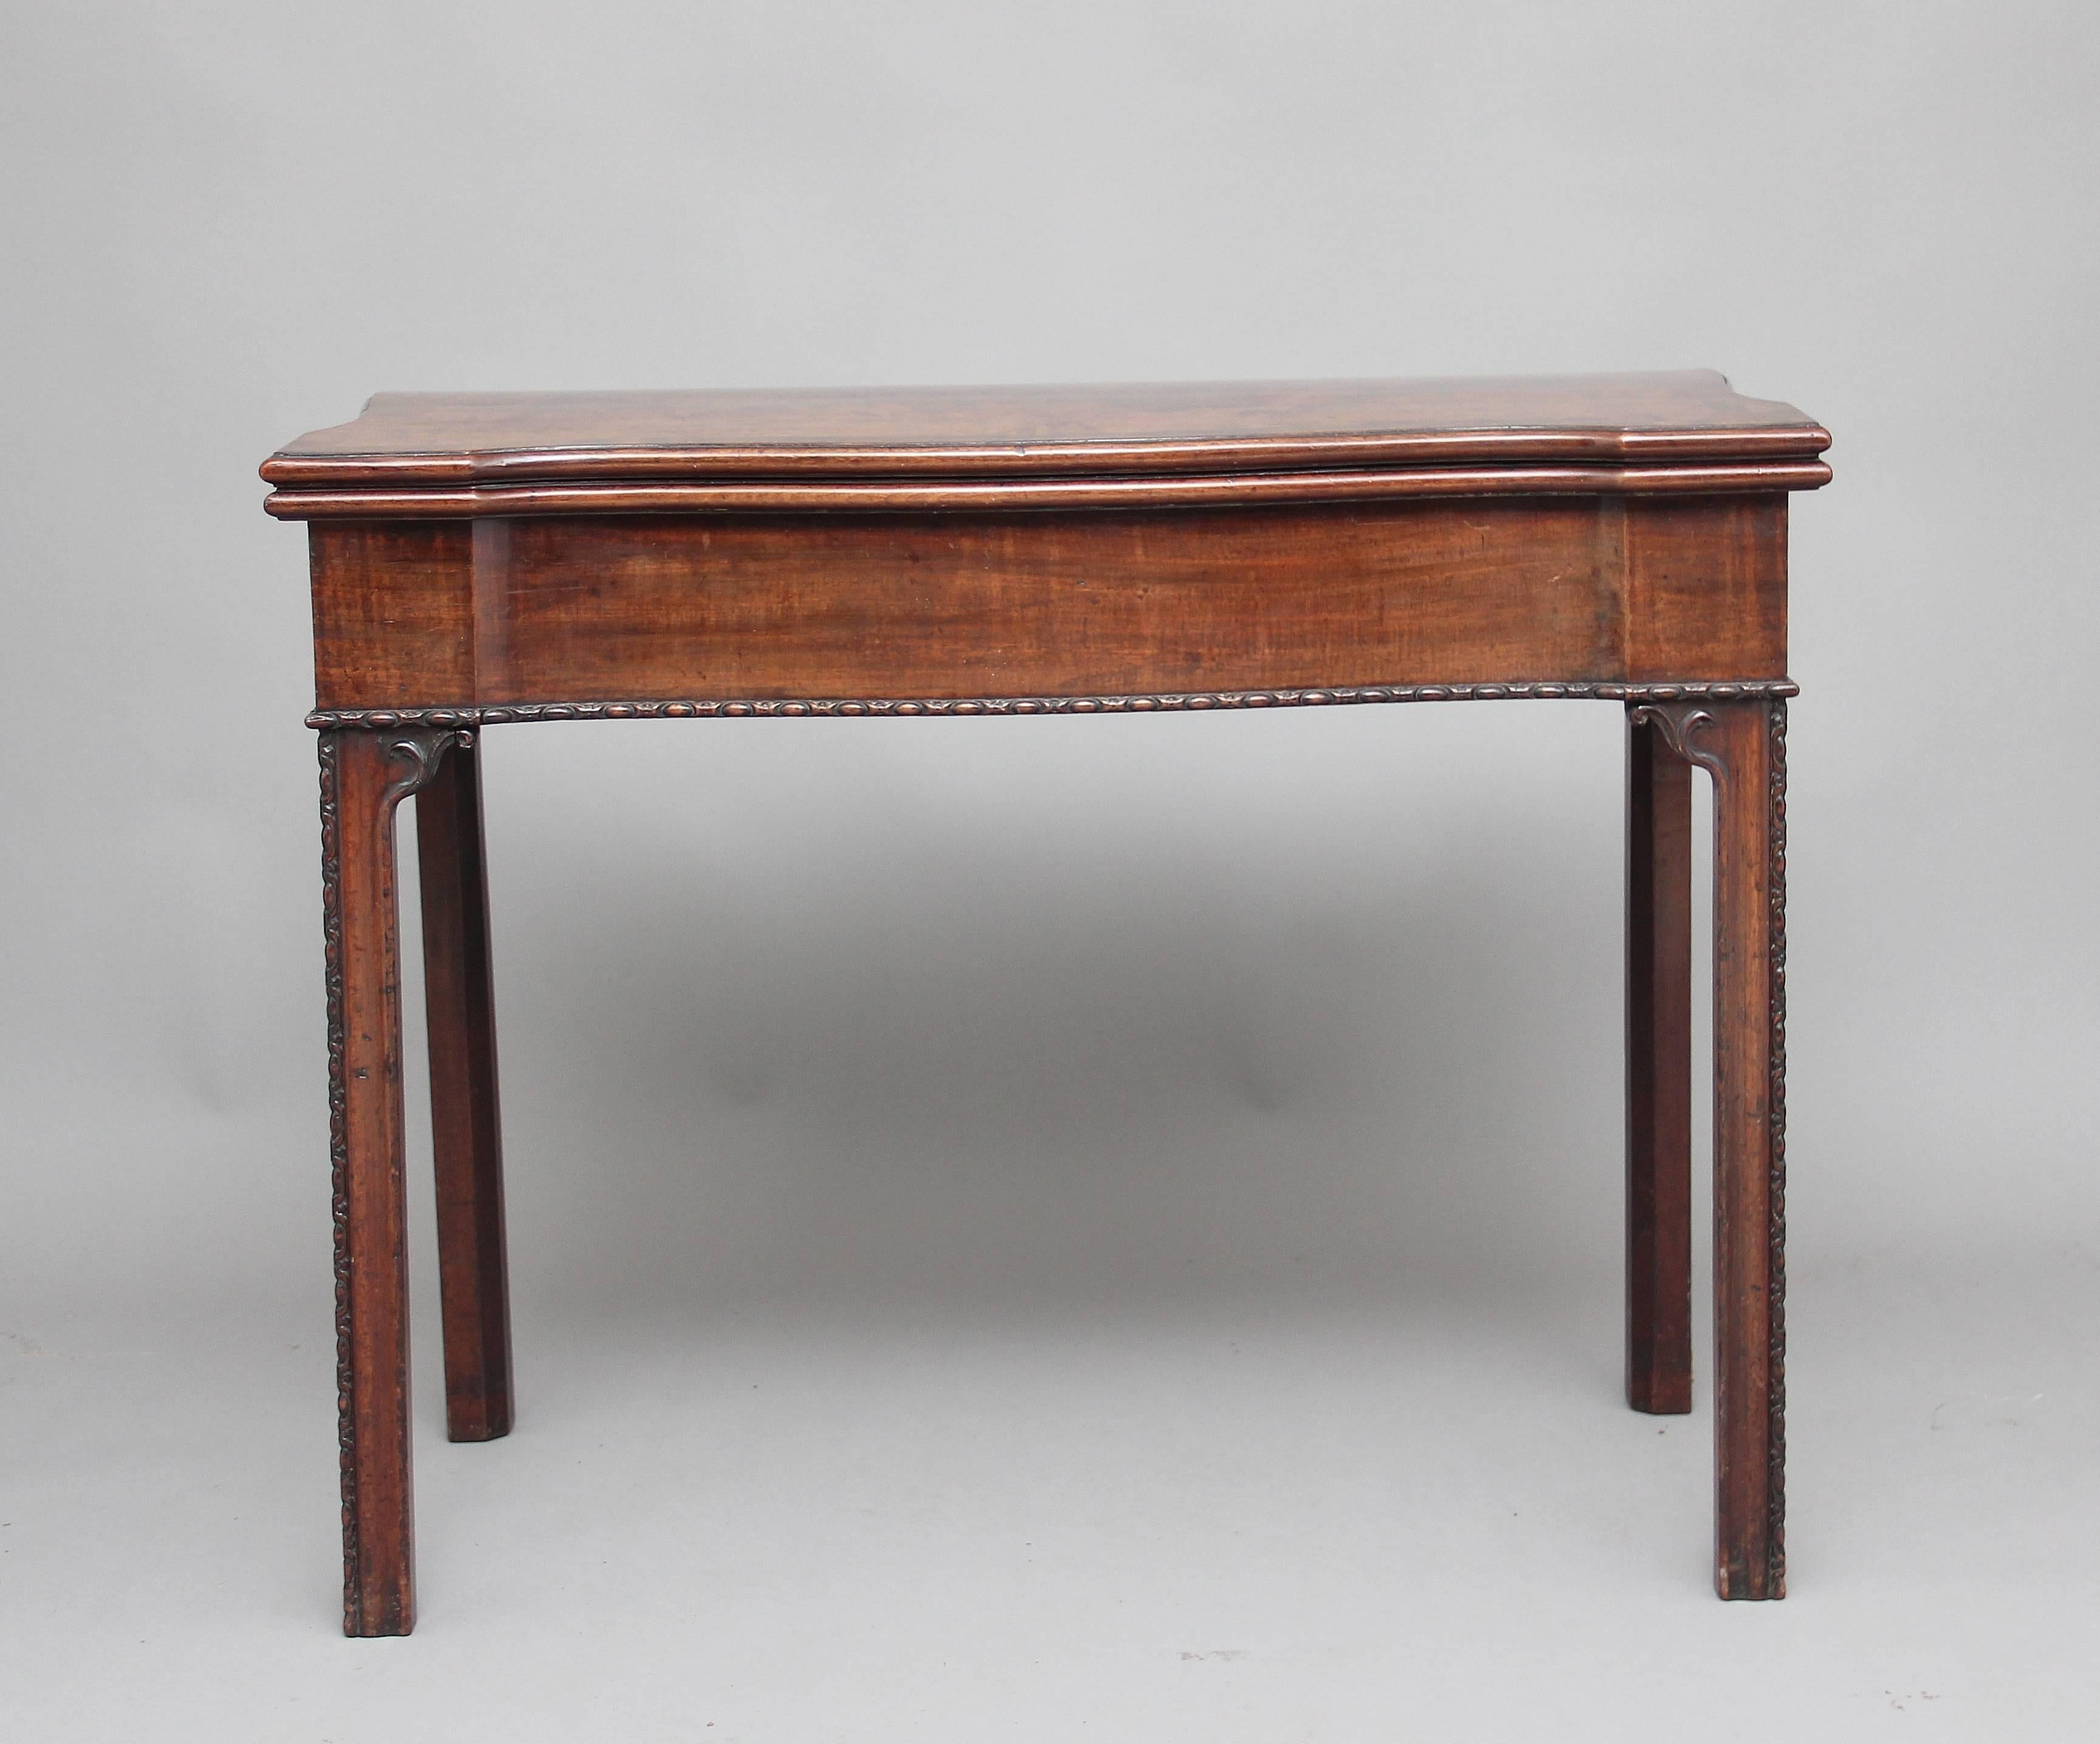 18th century mahogany serpentine card table with a crossbanded fold over top lined with a green baize playing surface, the table has lovely detailed beading running along the frieze and on the legs, lovely patina, circa 1780.
 